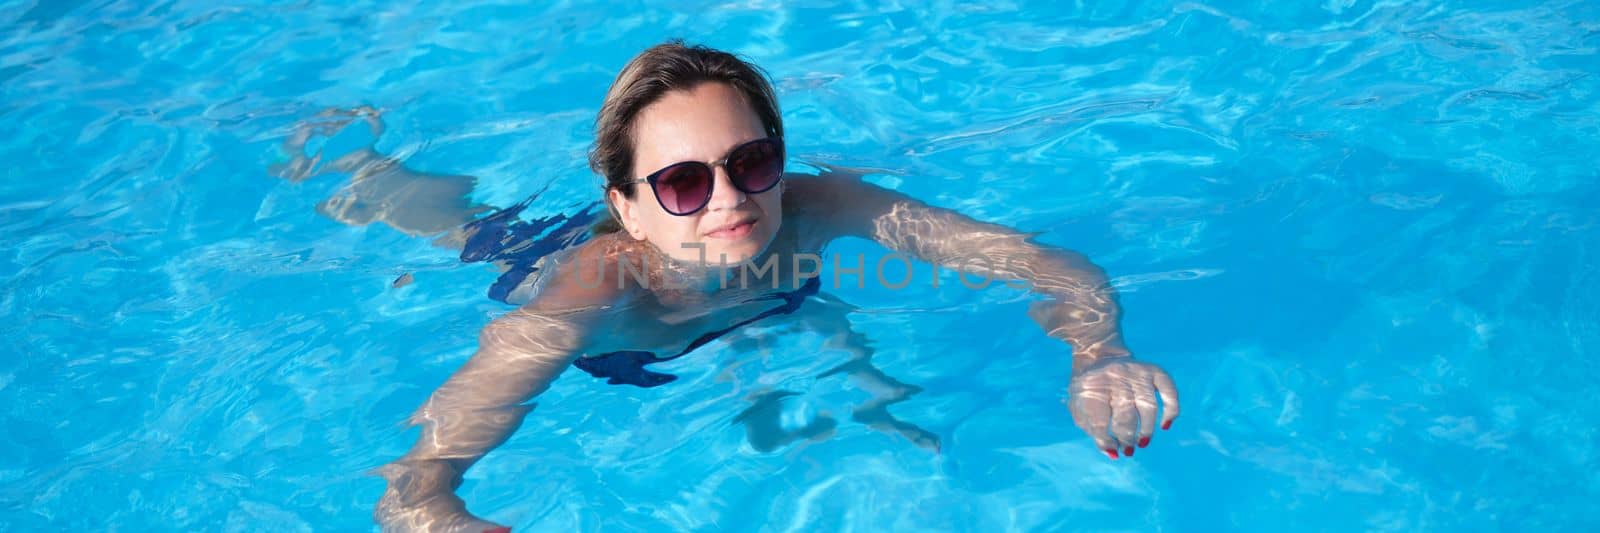 Woman in sunglasses swims in pool in summer. Summer vacation and relaxation concept